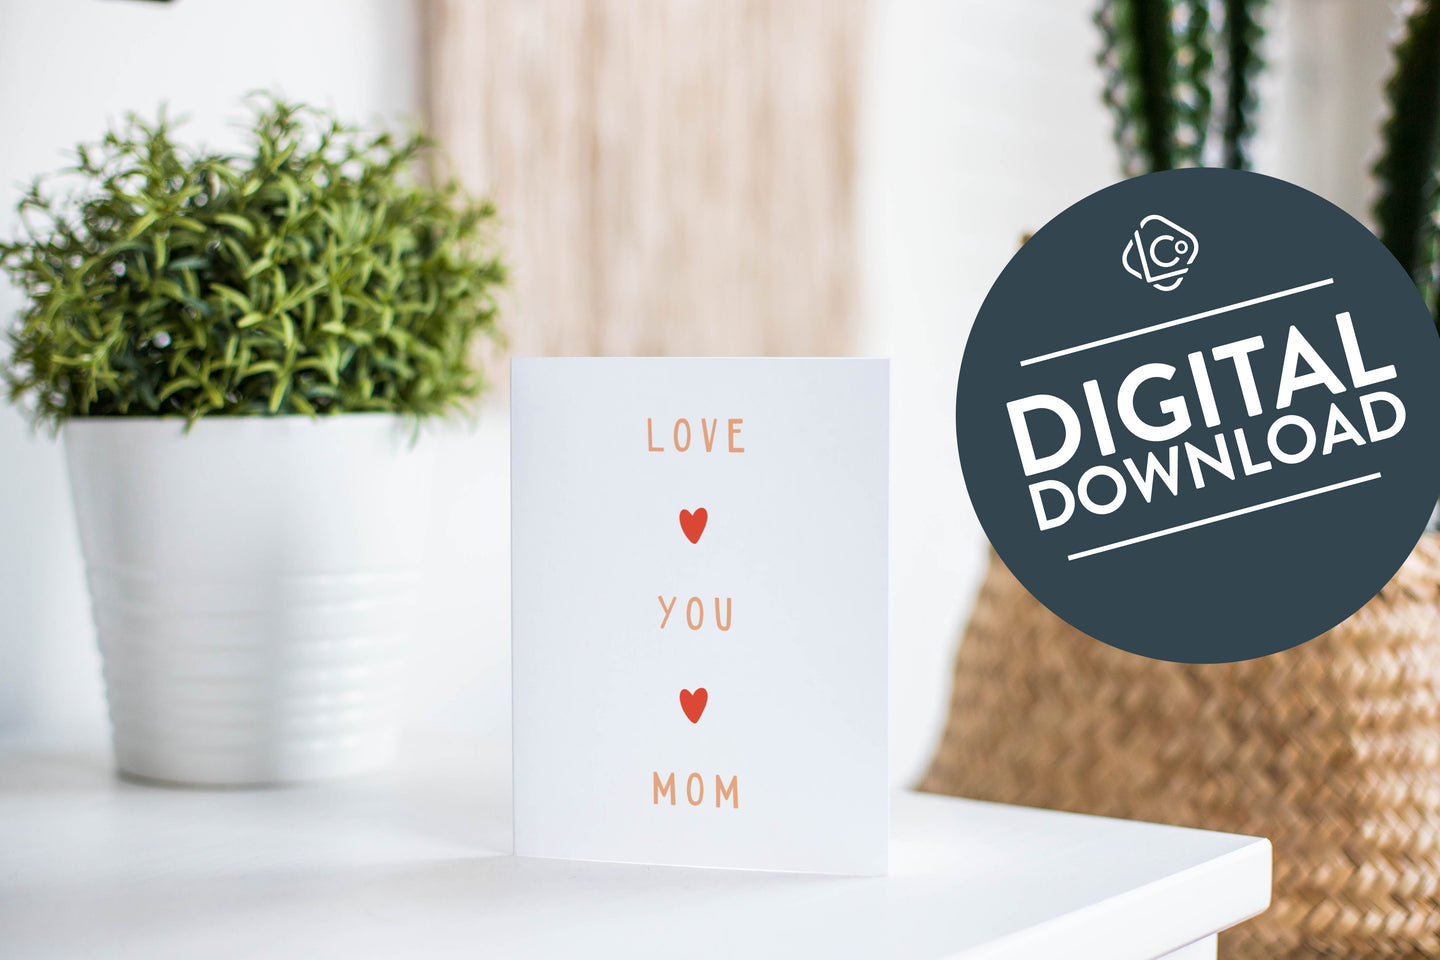 A greeting card is featured on a white tabletop with a white planter in the background with a green plant. There’s a woven basket in the background with a cactus inside. The card features the words ”Love You Mom.” The words 